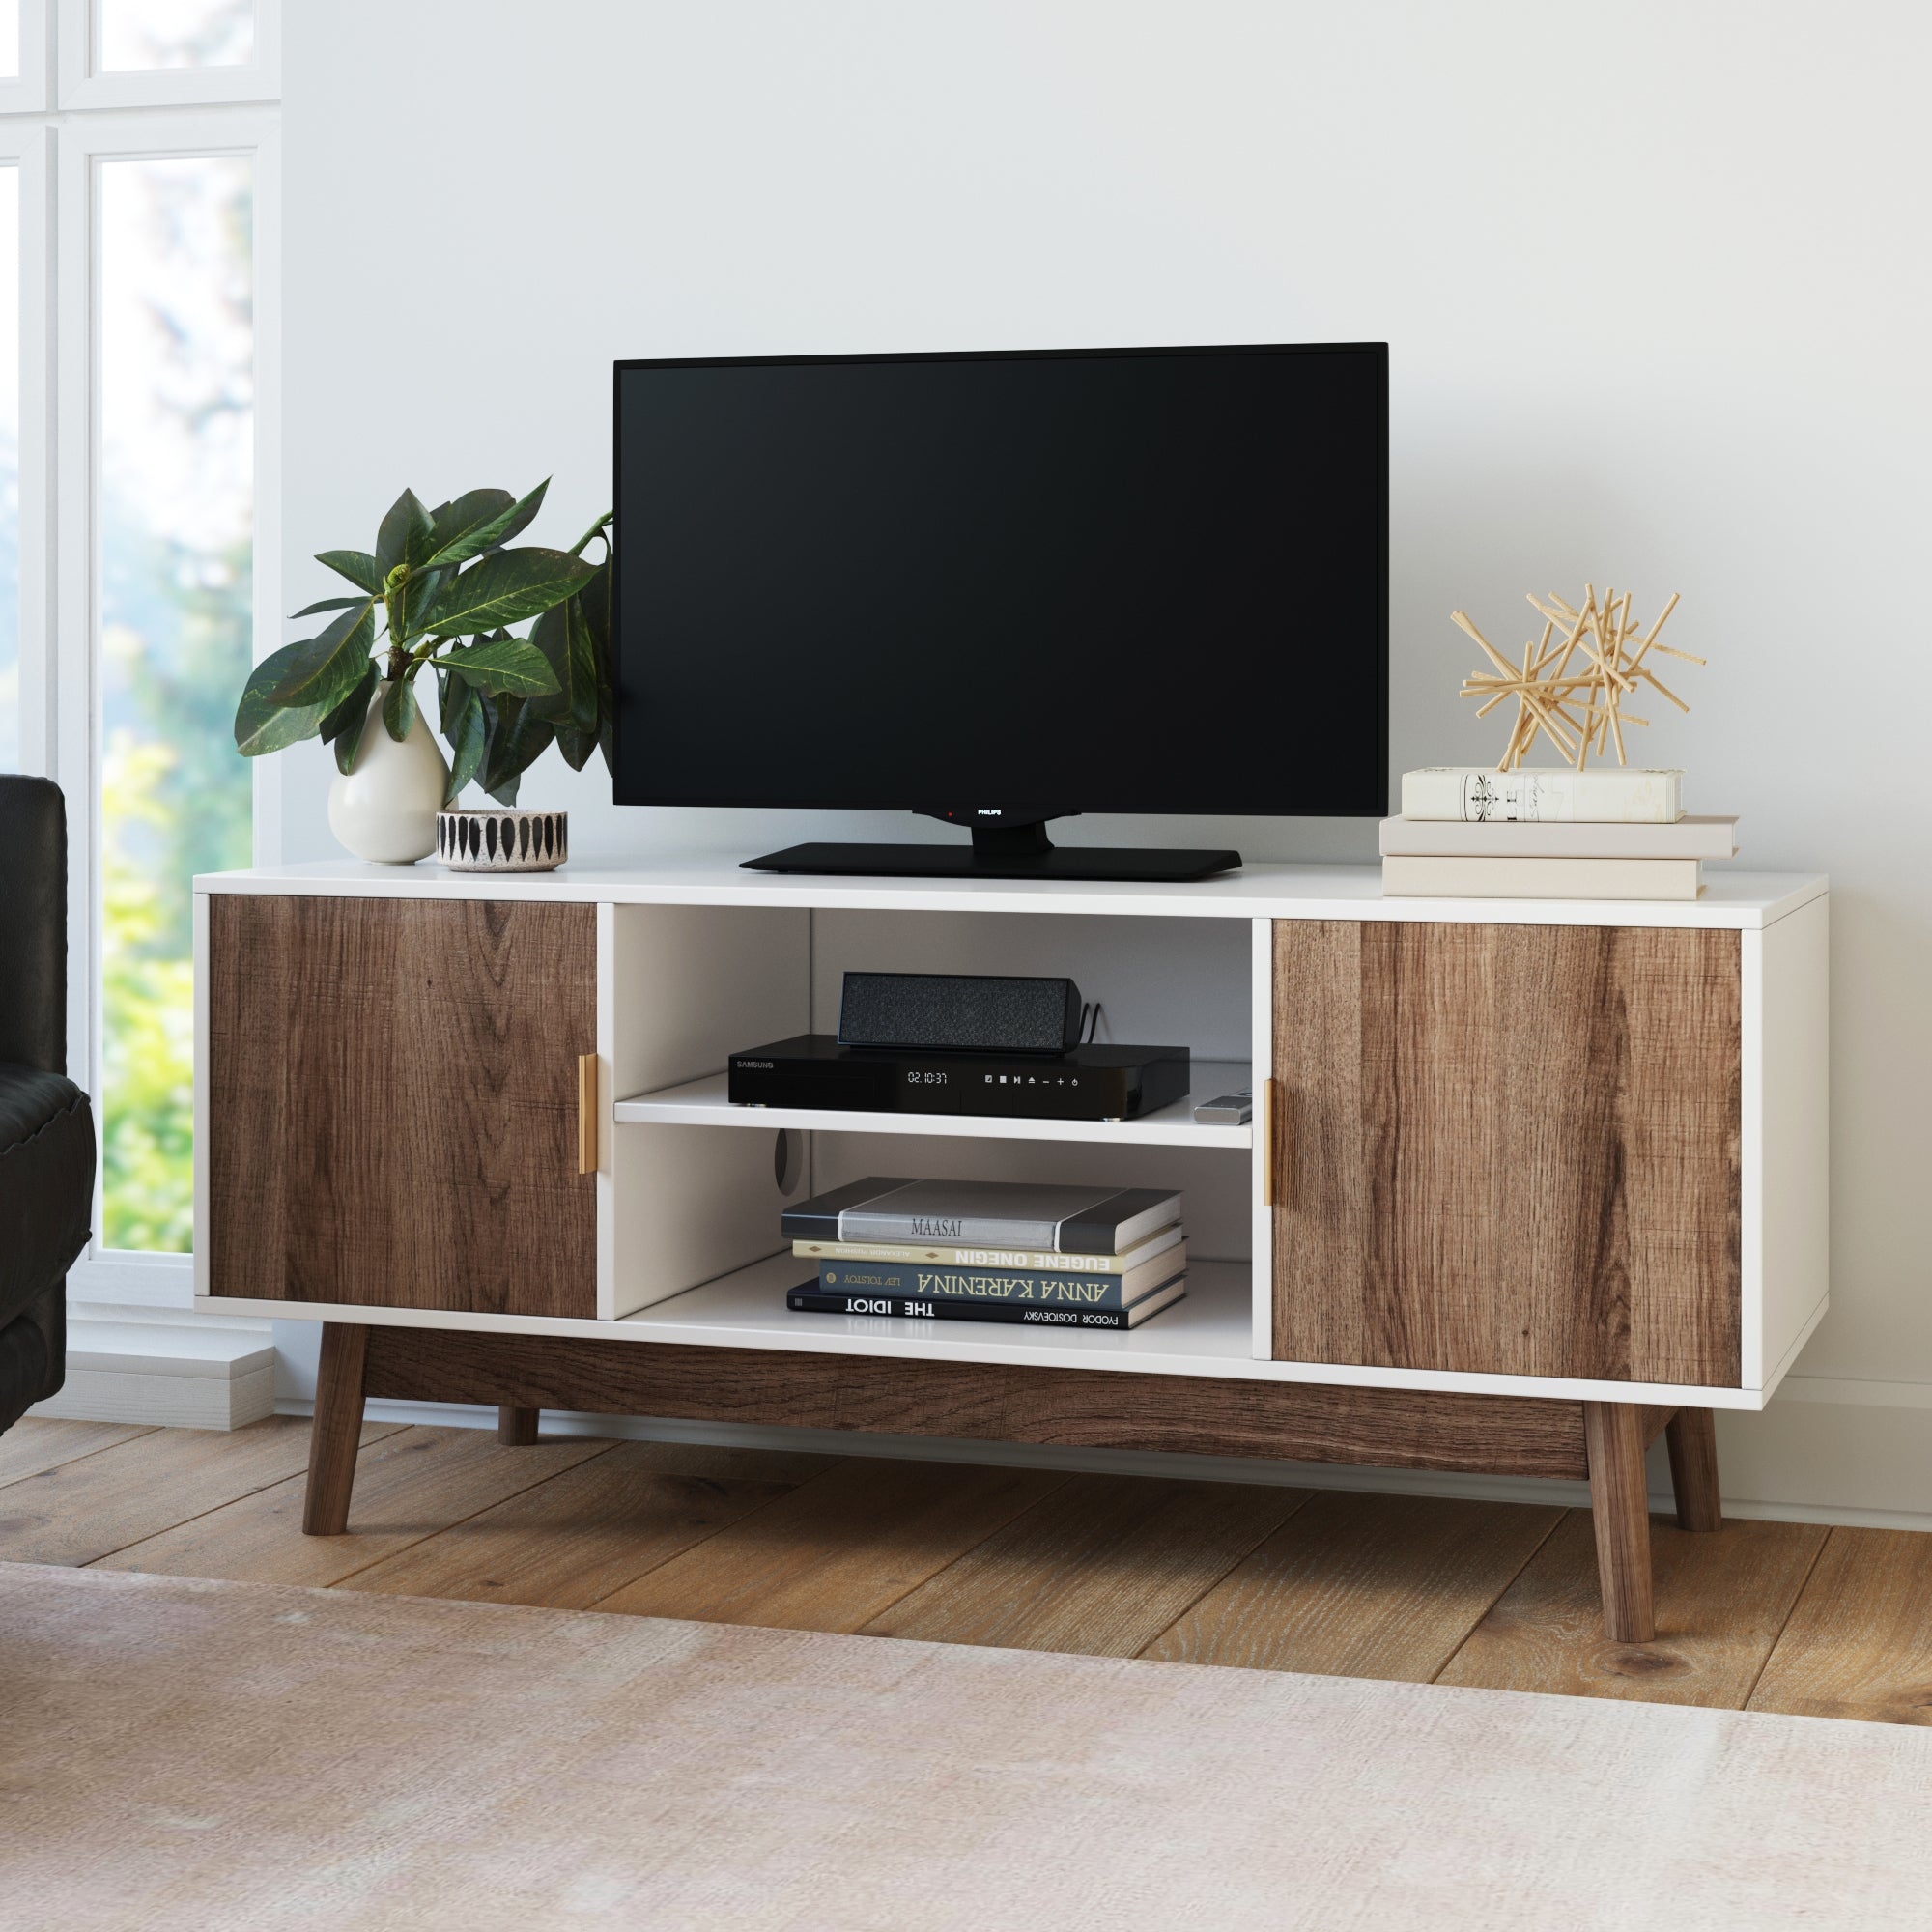 Wesley White Storage Cabinet 2-Door Modern TV | Nathan James with